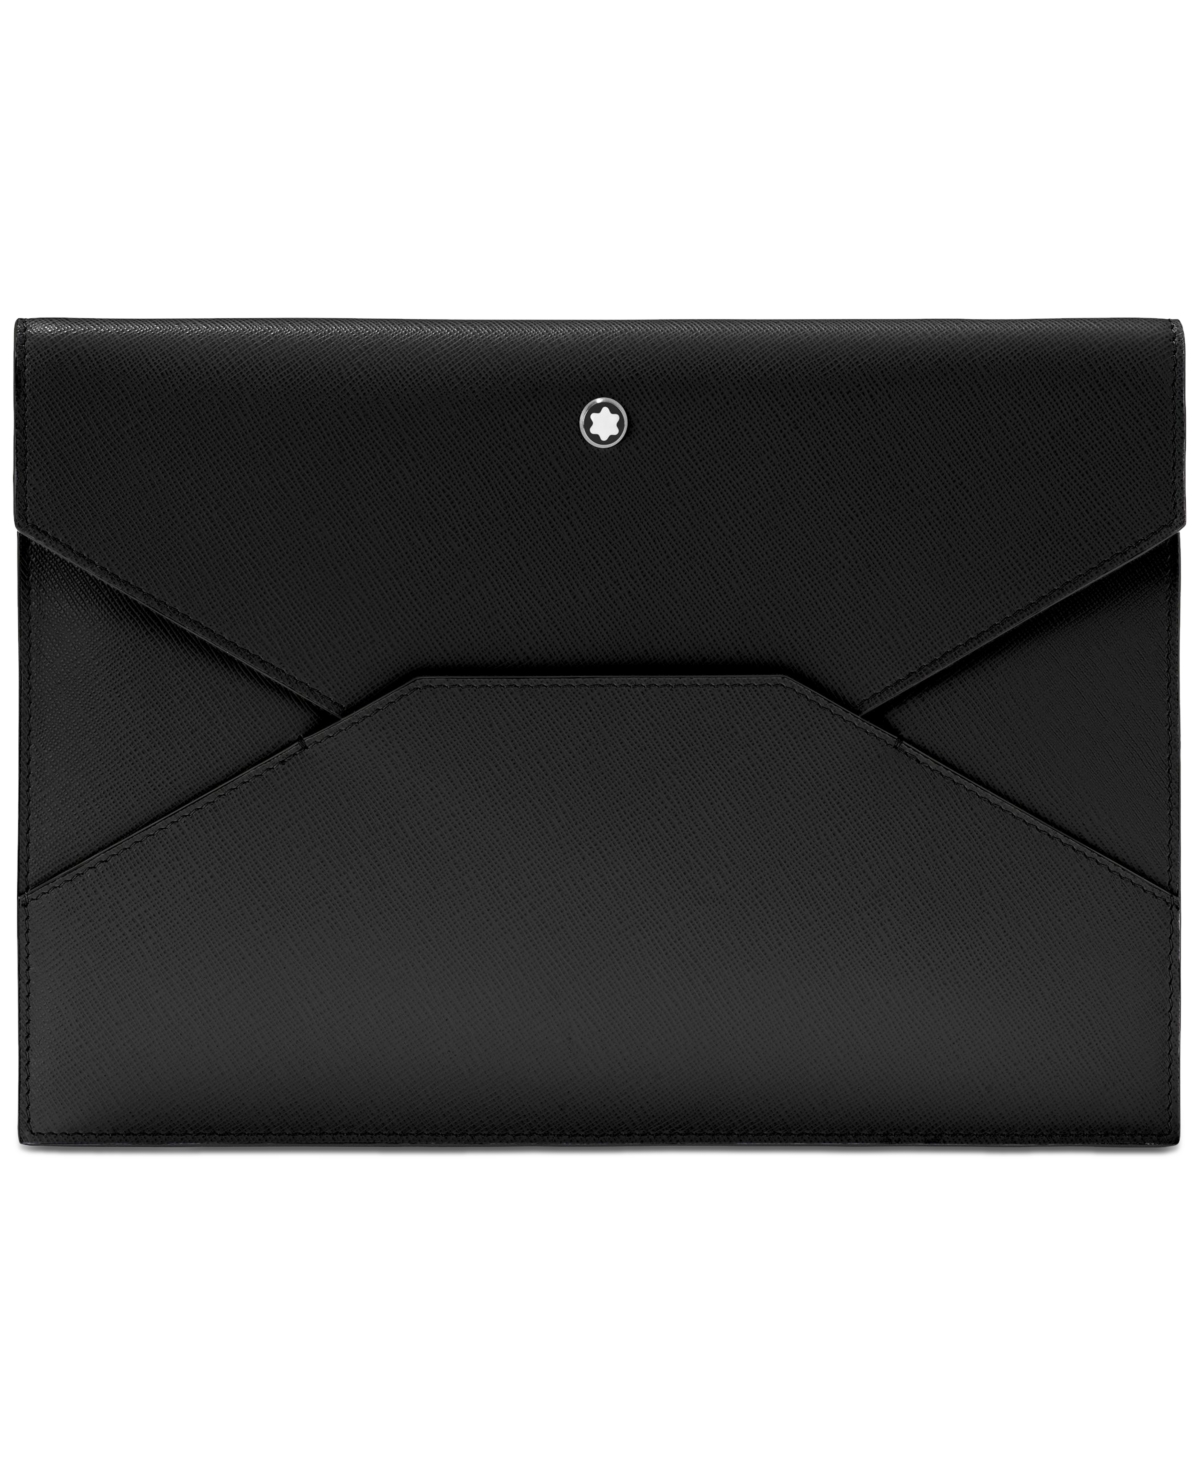 Montblanc Sartorial Leather Envelope Pouch In Black